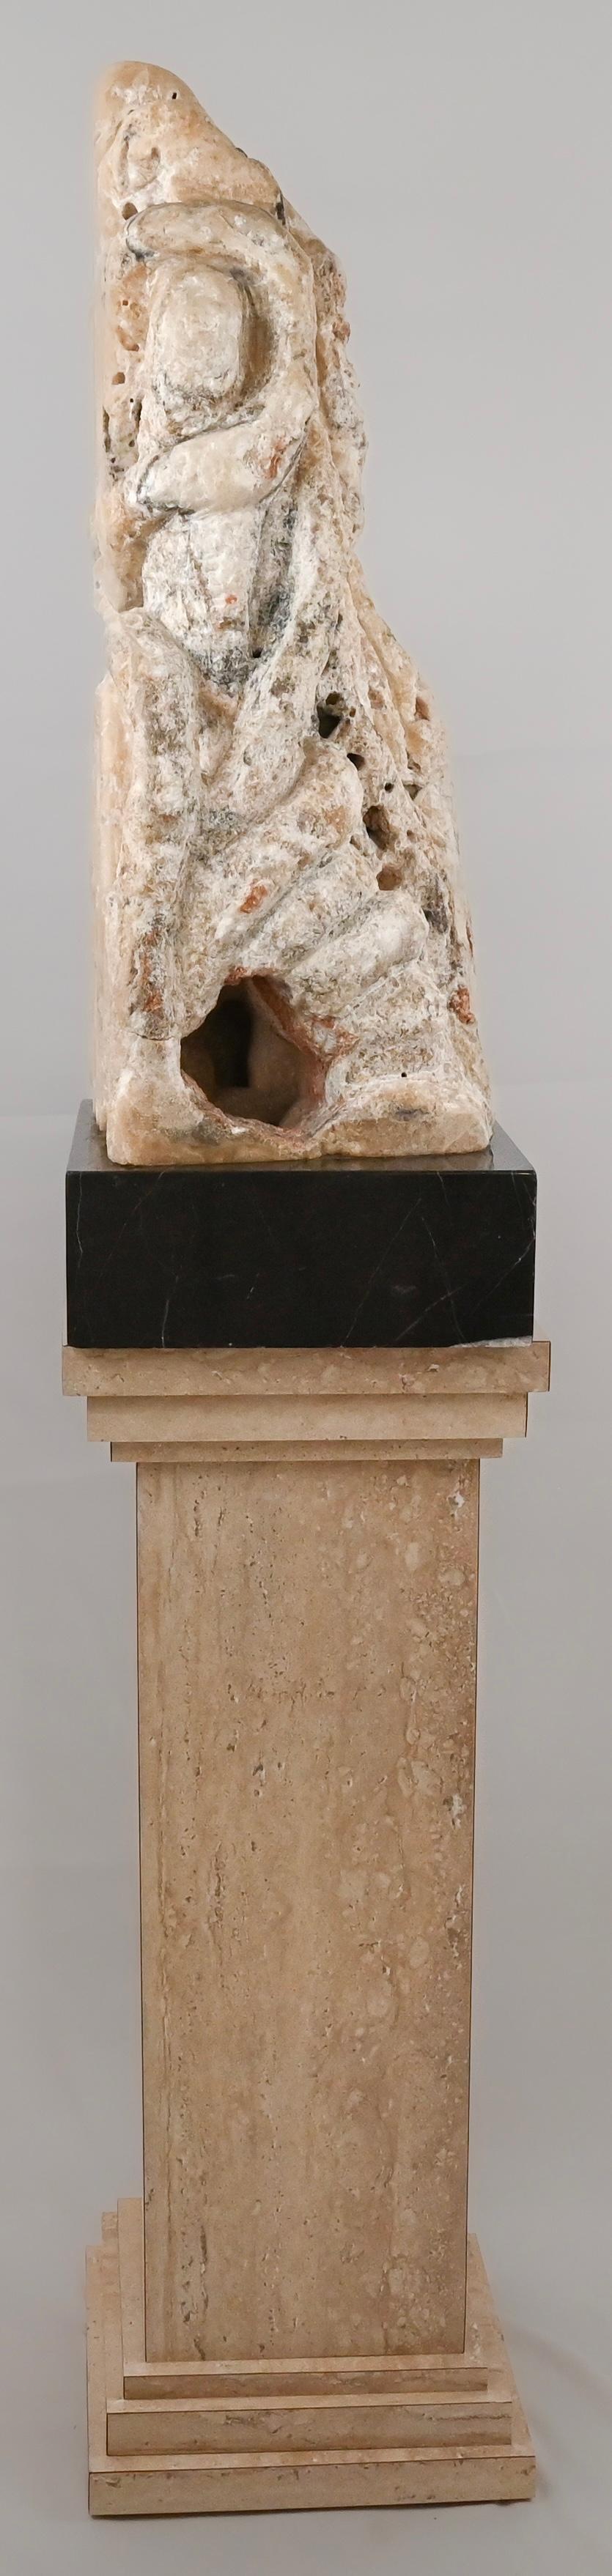 19th Century Abstract Stone Sculpture Chinese Scholar Stone on a Faux Marble Stand For Sale